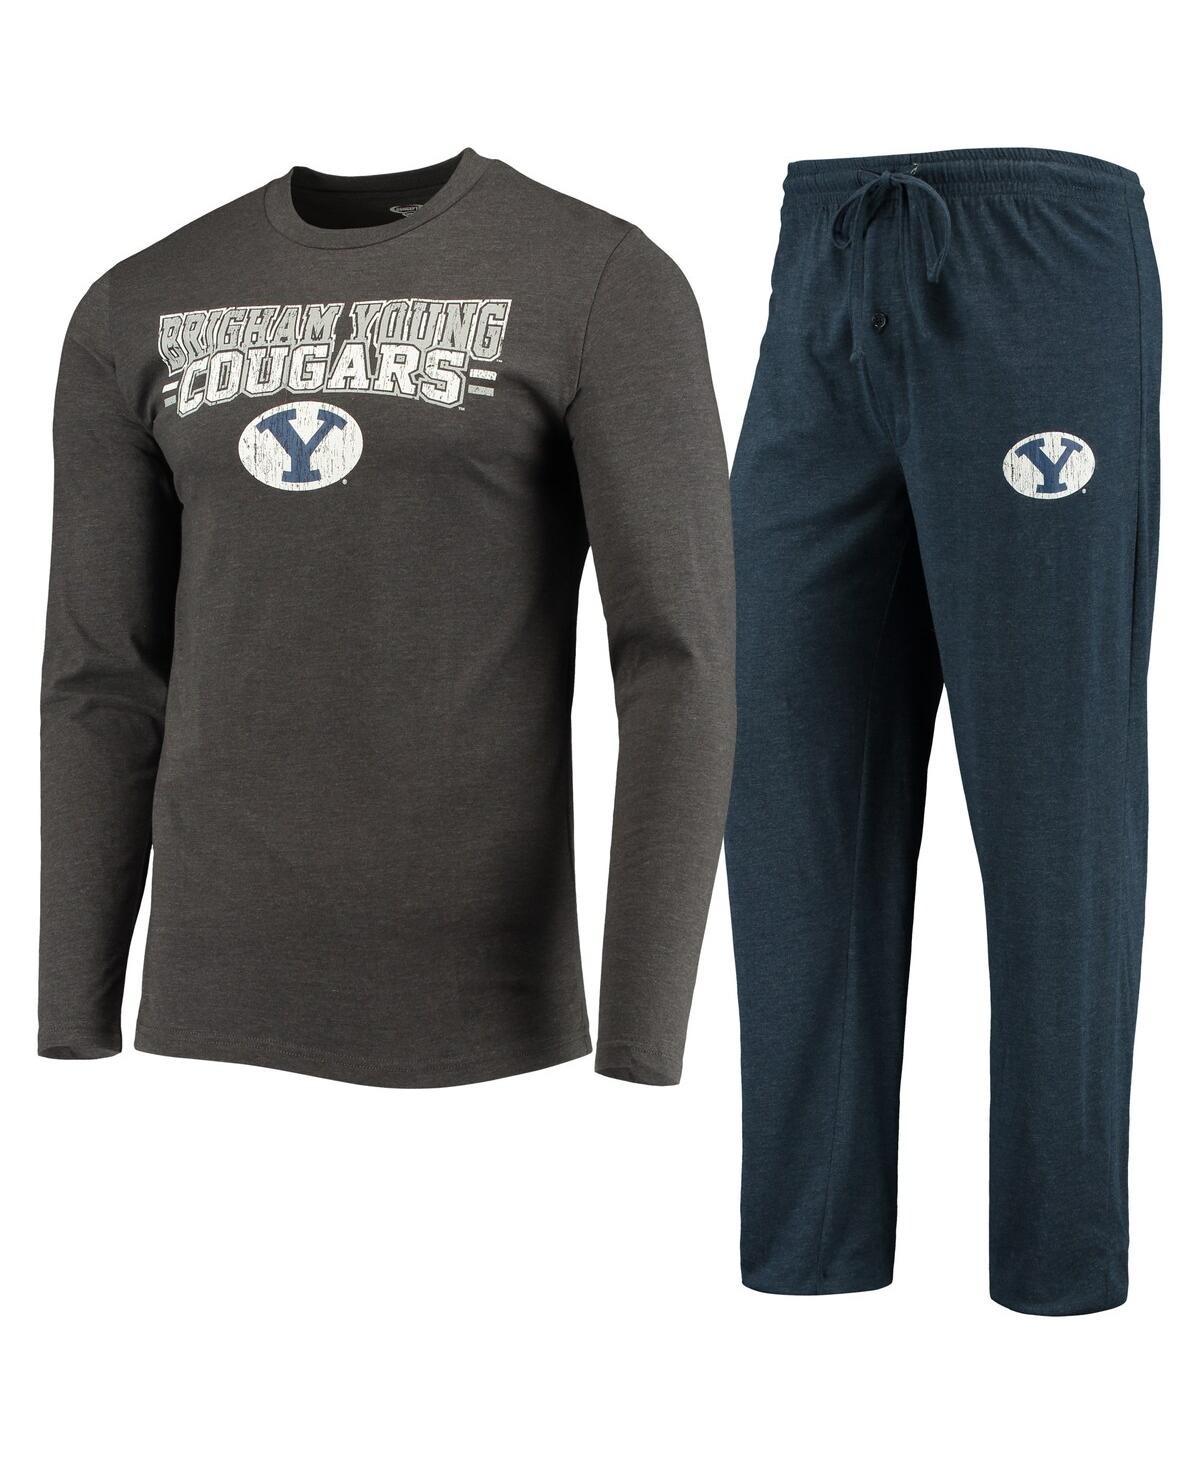 Shop Concepts Sport Men's  Navy, Heathered Charcoal Distressed Byu Cougars Meter Long Sleeve T-shirt And P In Navy,heather Charcoal